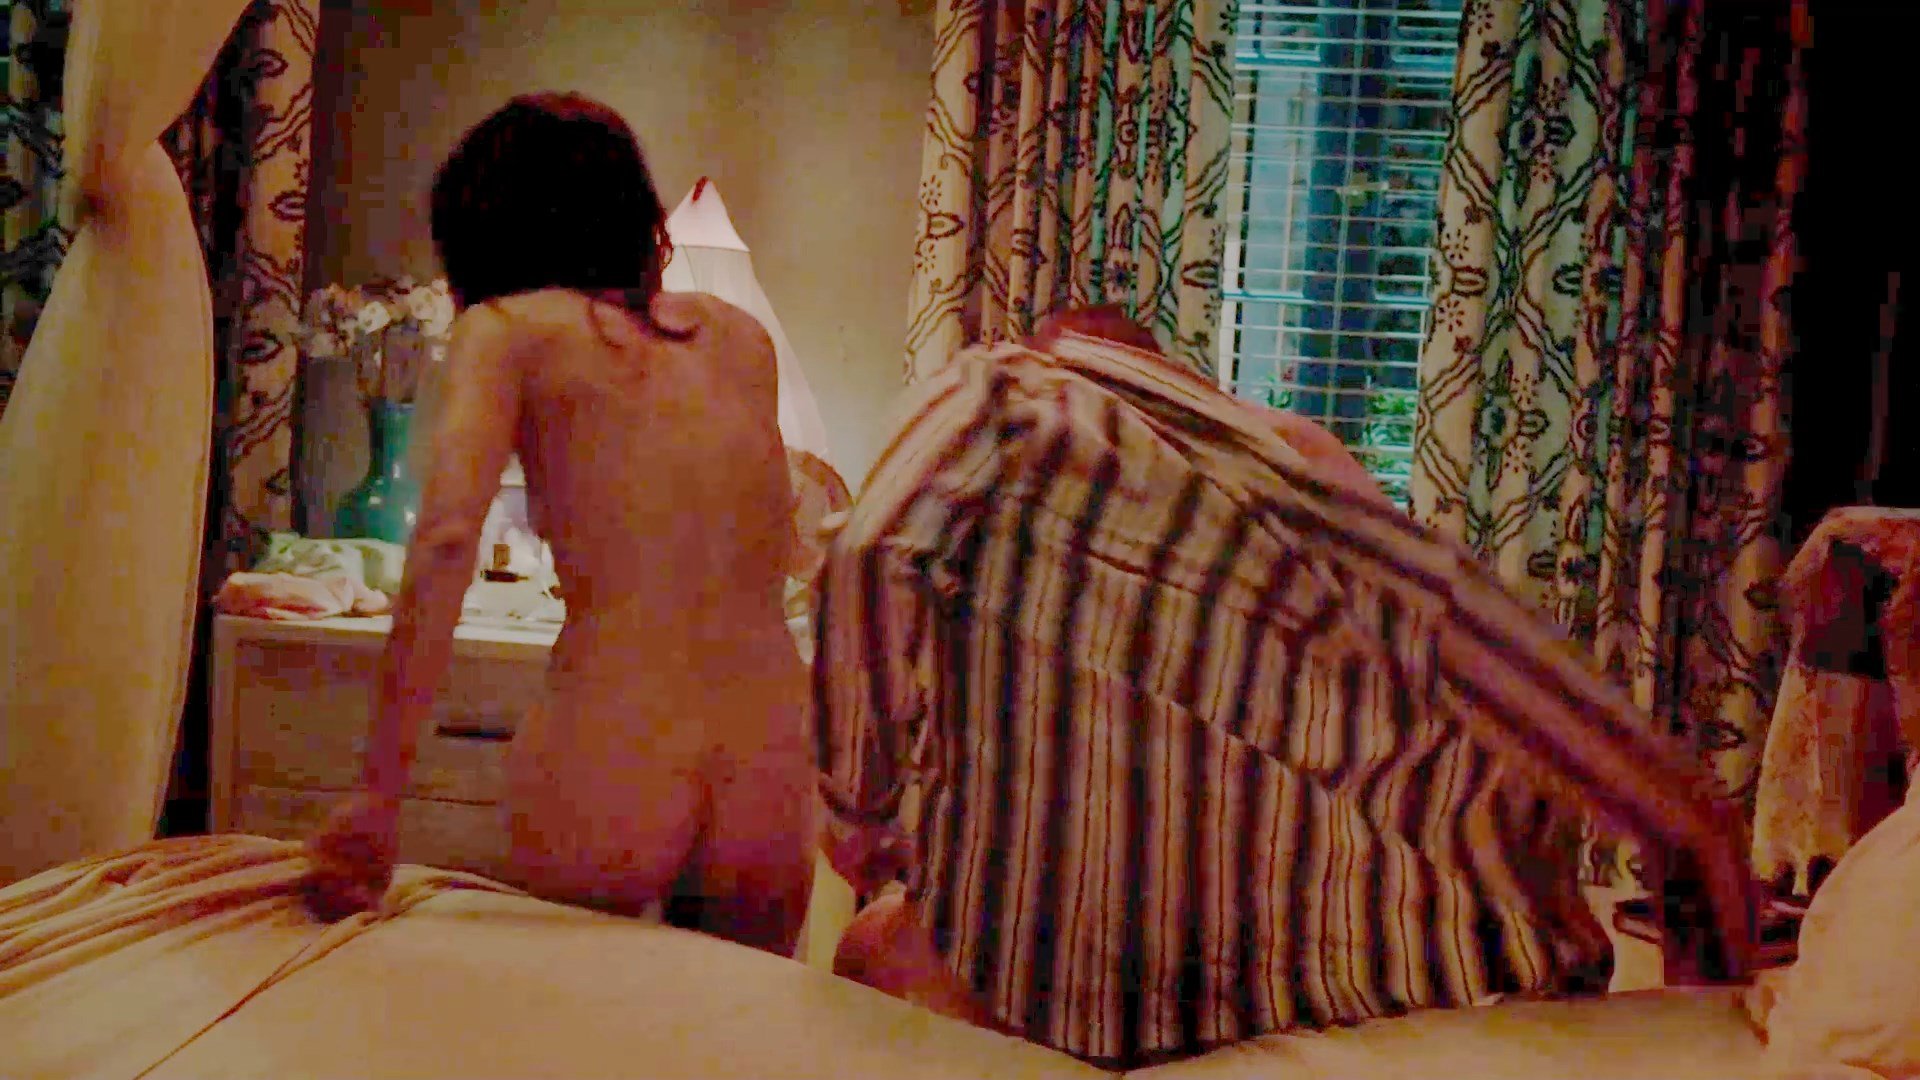 Aimee Garcia Nude Dexter 14 Pics And Video Thefappening